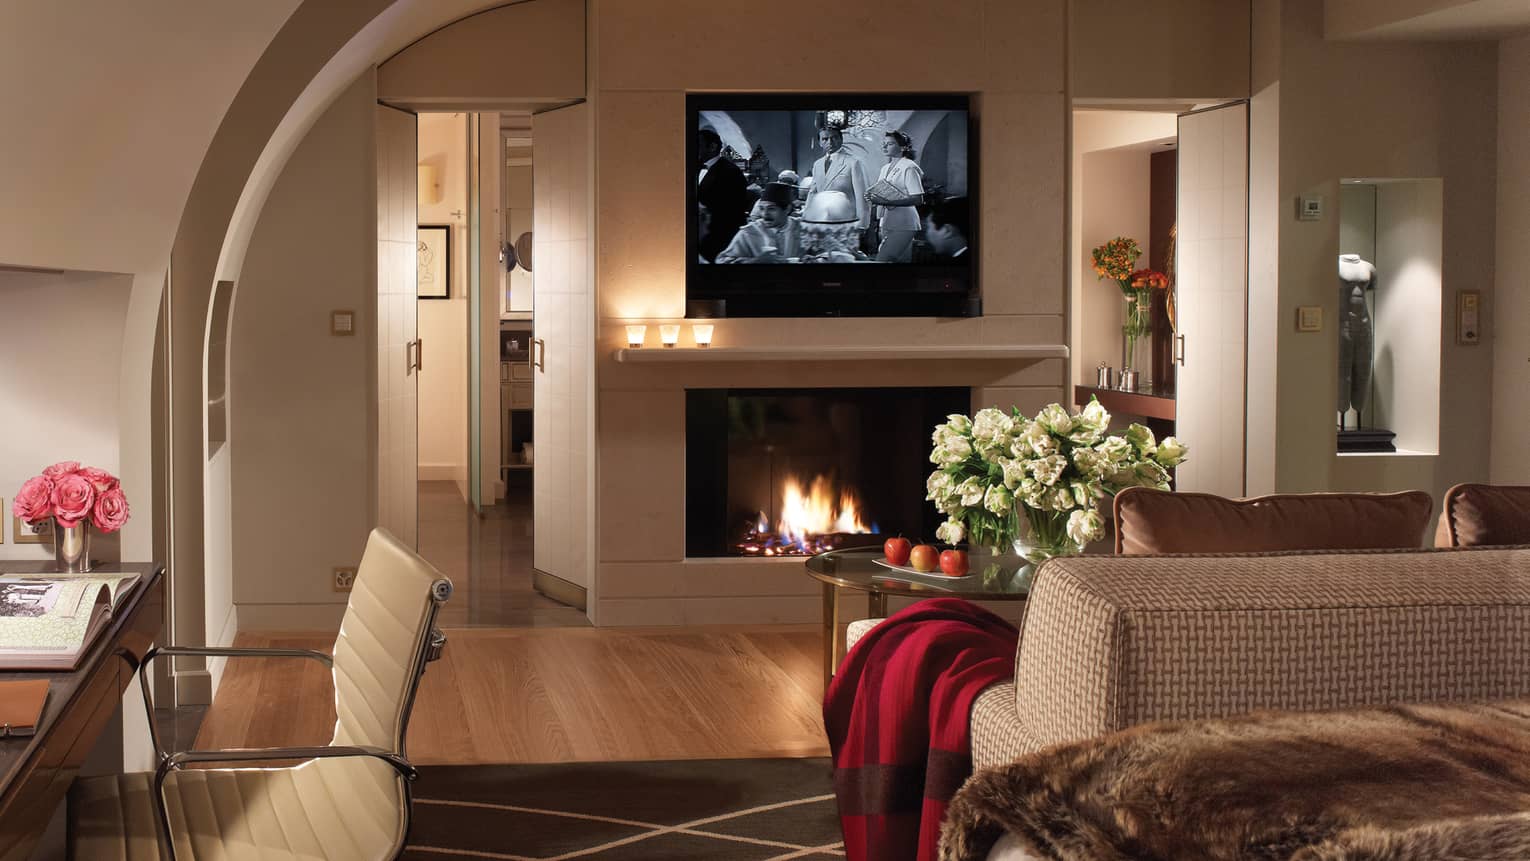 Flat-screen TV showing black-and-white-movie above glass fireplace, sofa with red blanket on arm